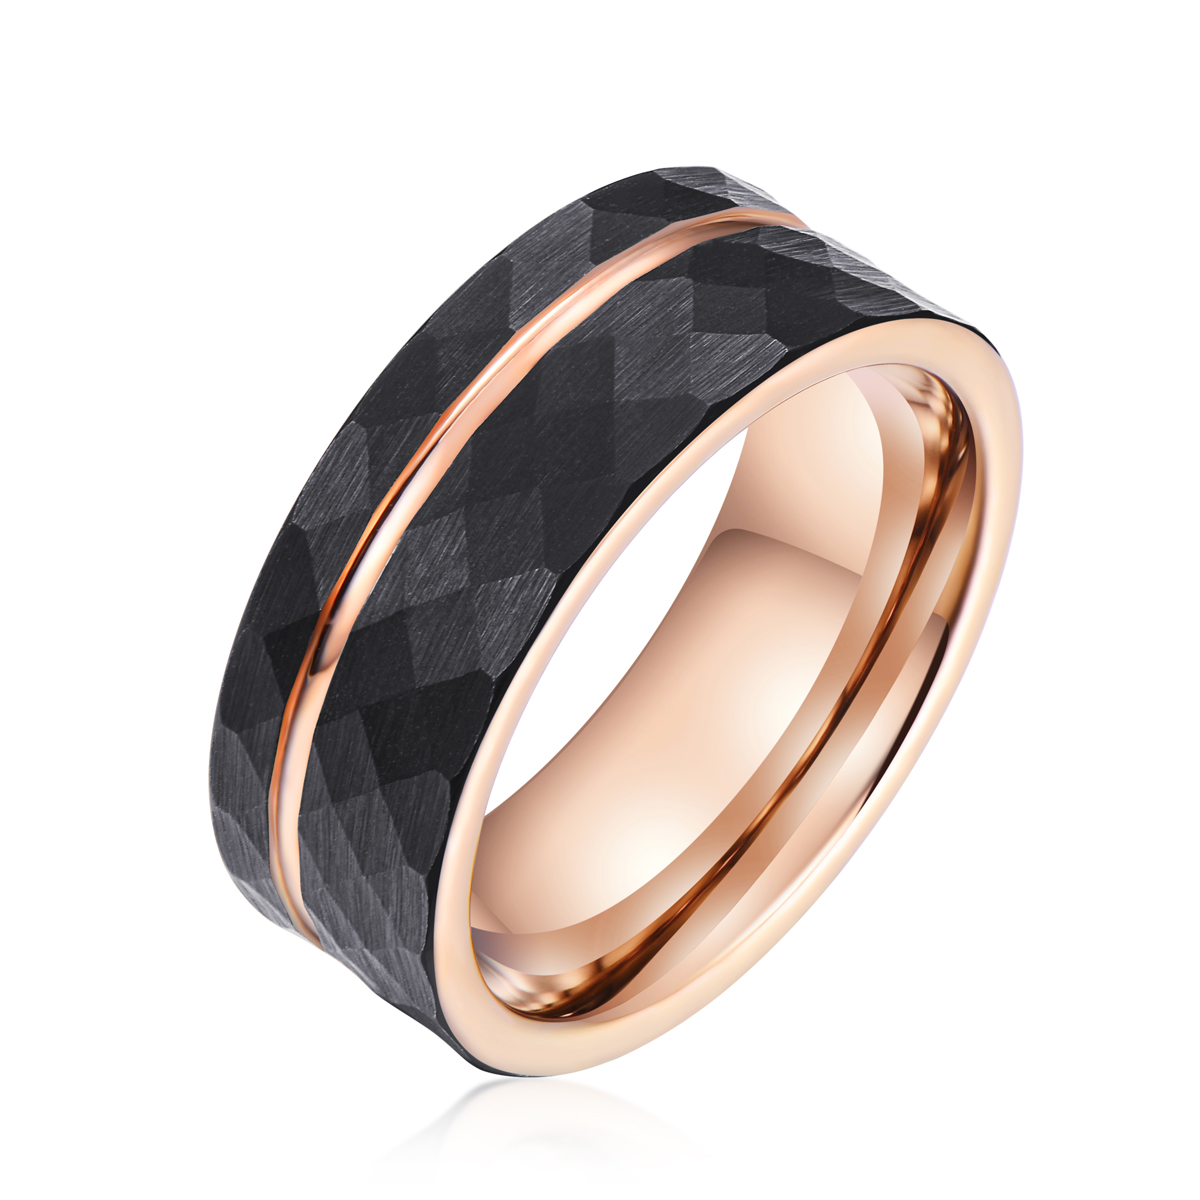 8mm Tungsten Carbide Ring Domed Rose Gold Plated Black Brushed Groove Men Women Wedding Band Fashion Jewelry Rings Featured Image